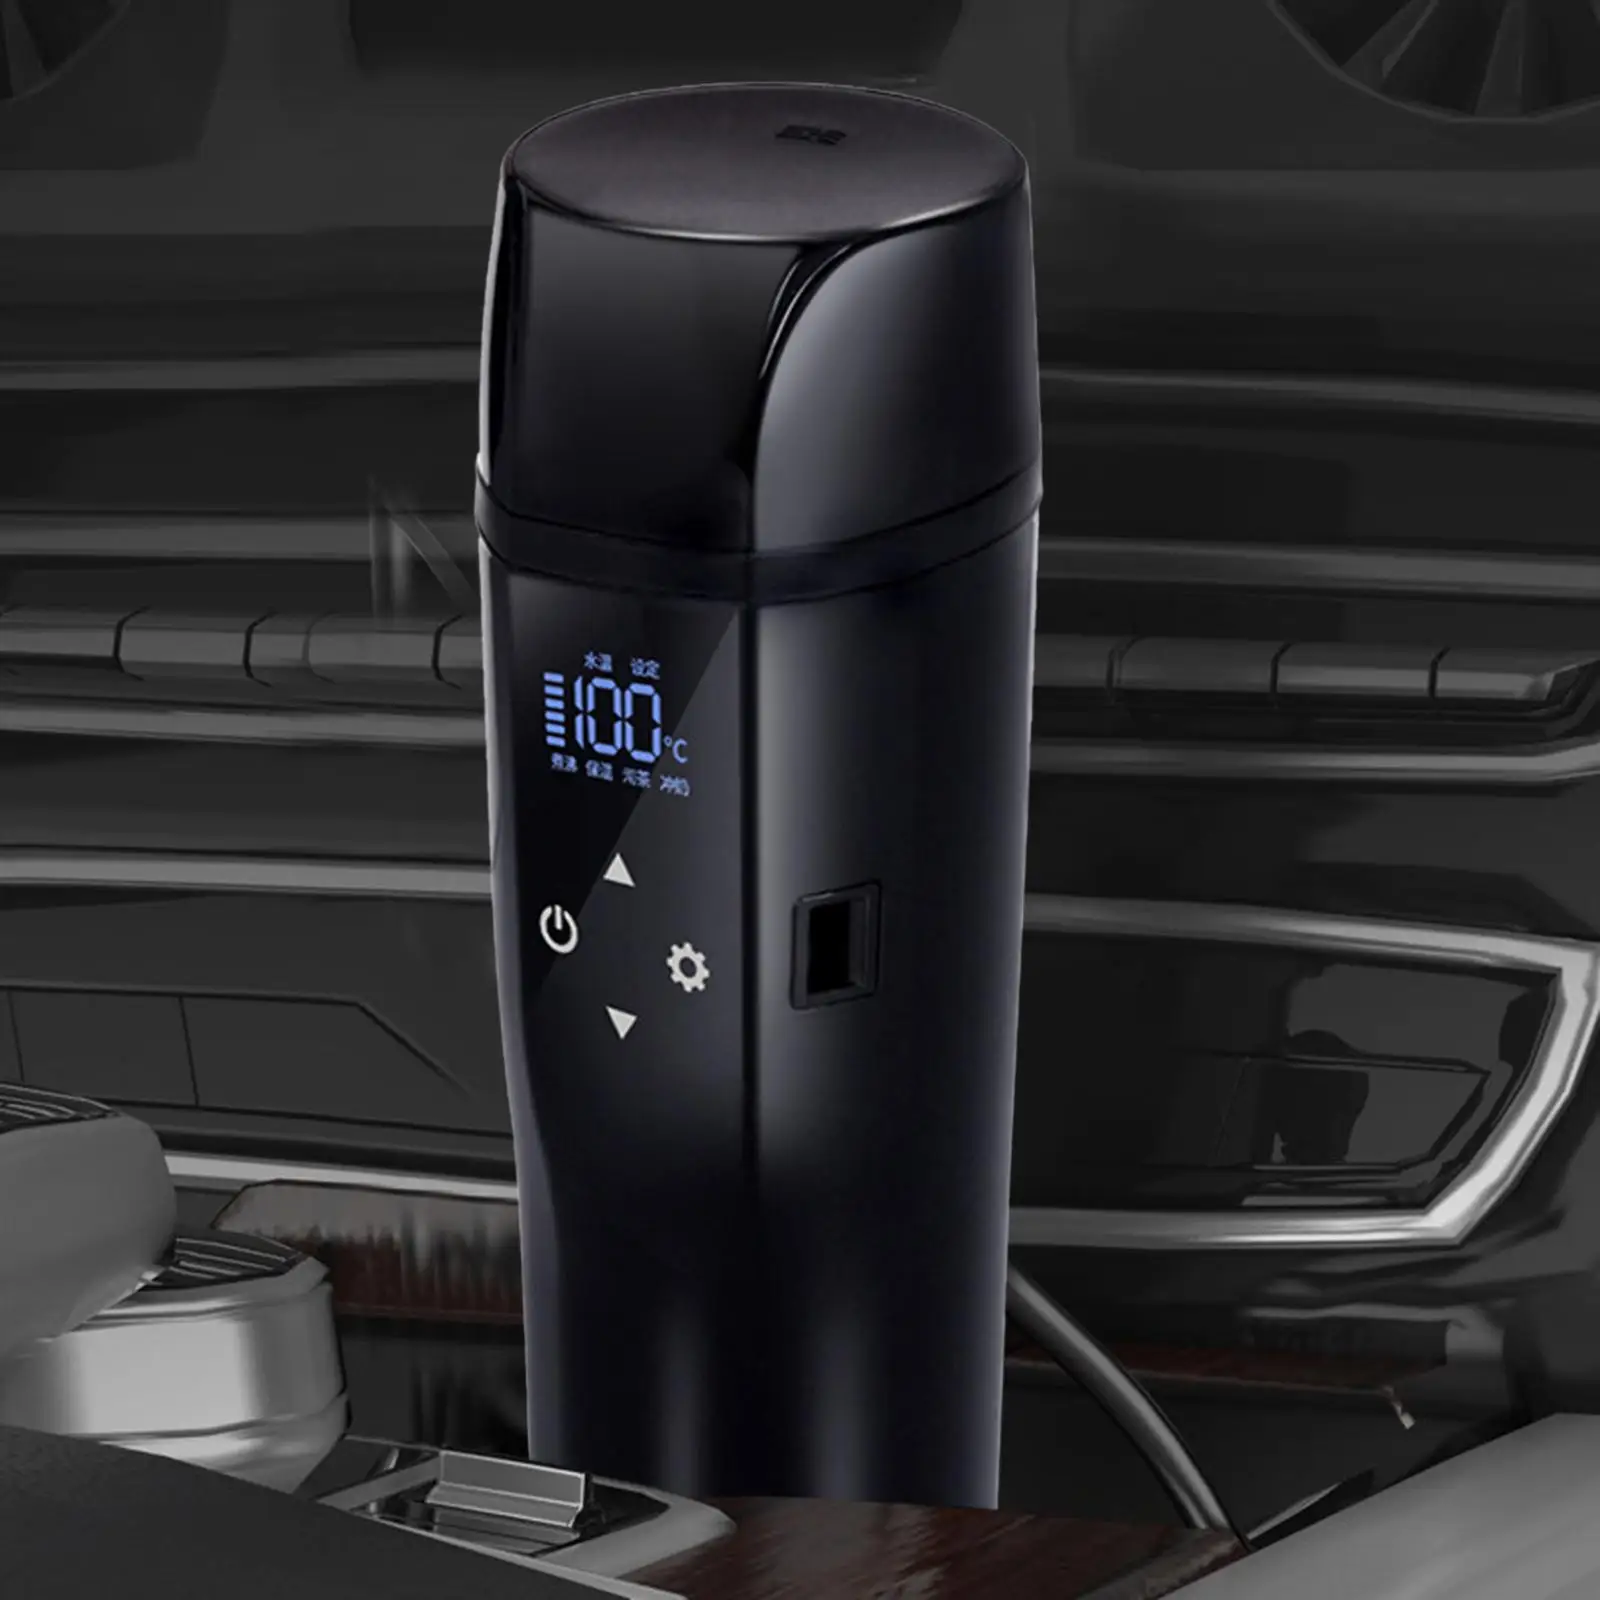 Car Heating Cup 12V/24V Heater Digital Display 450ml Touch Control Fit for Travel Tea Auto Shut Off Cigarette Lighter Coffee